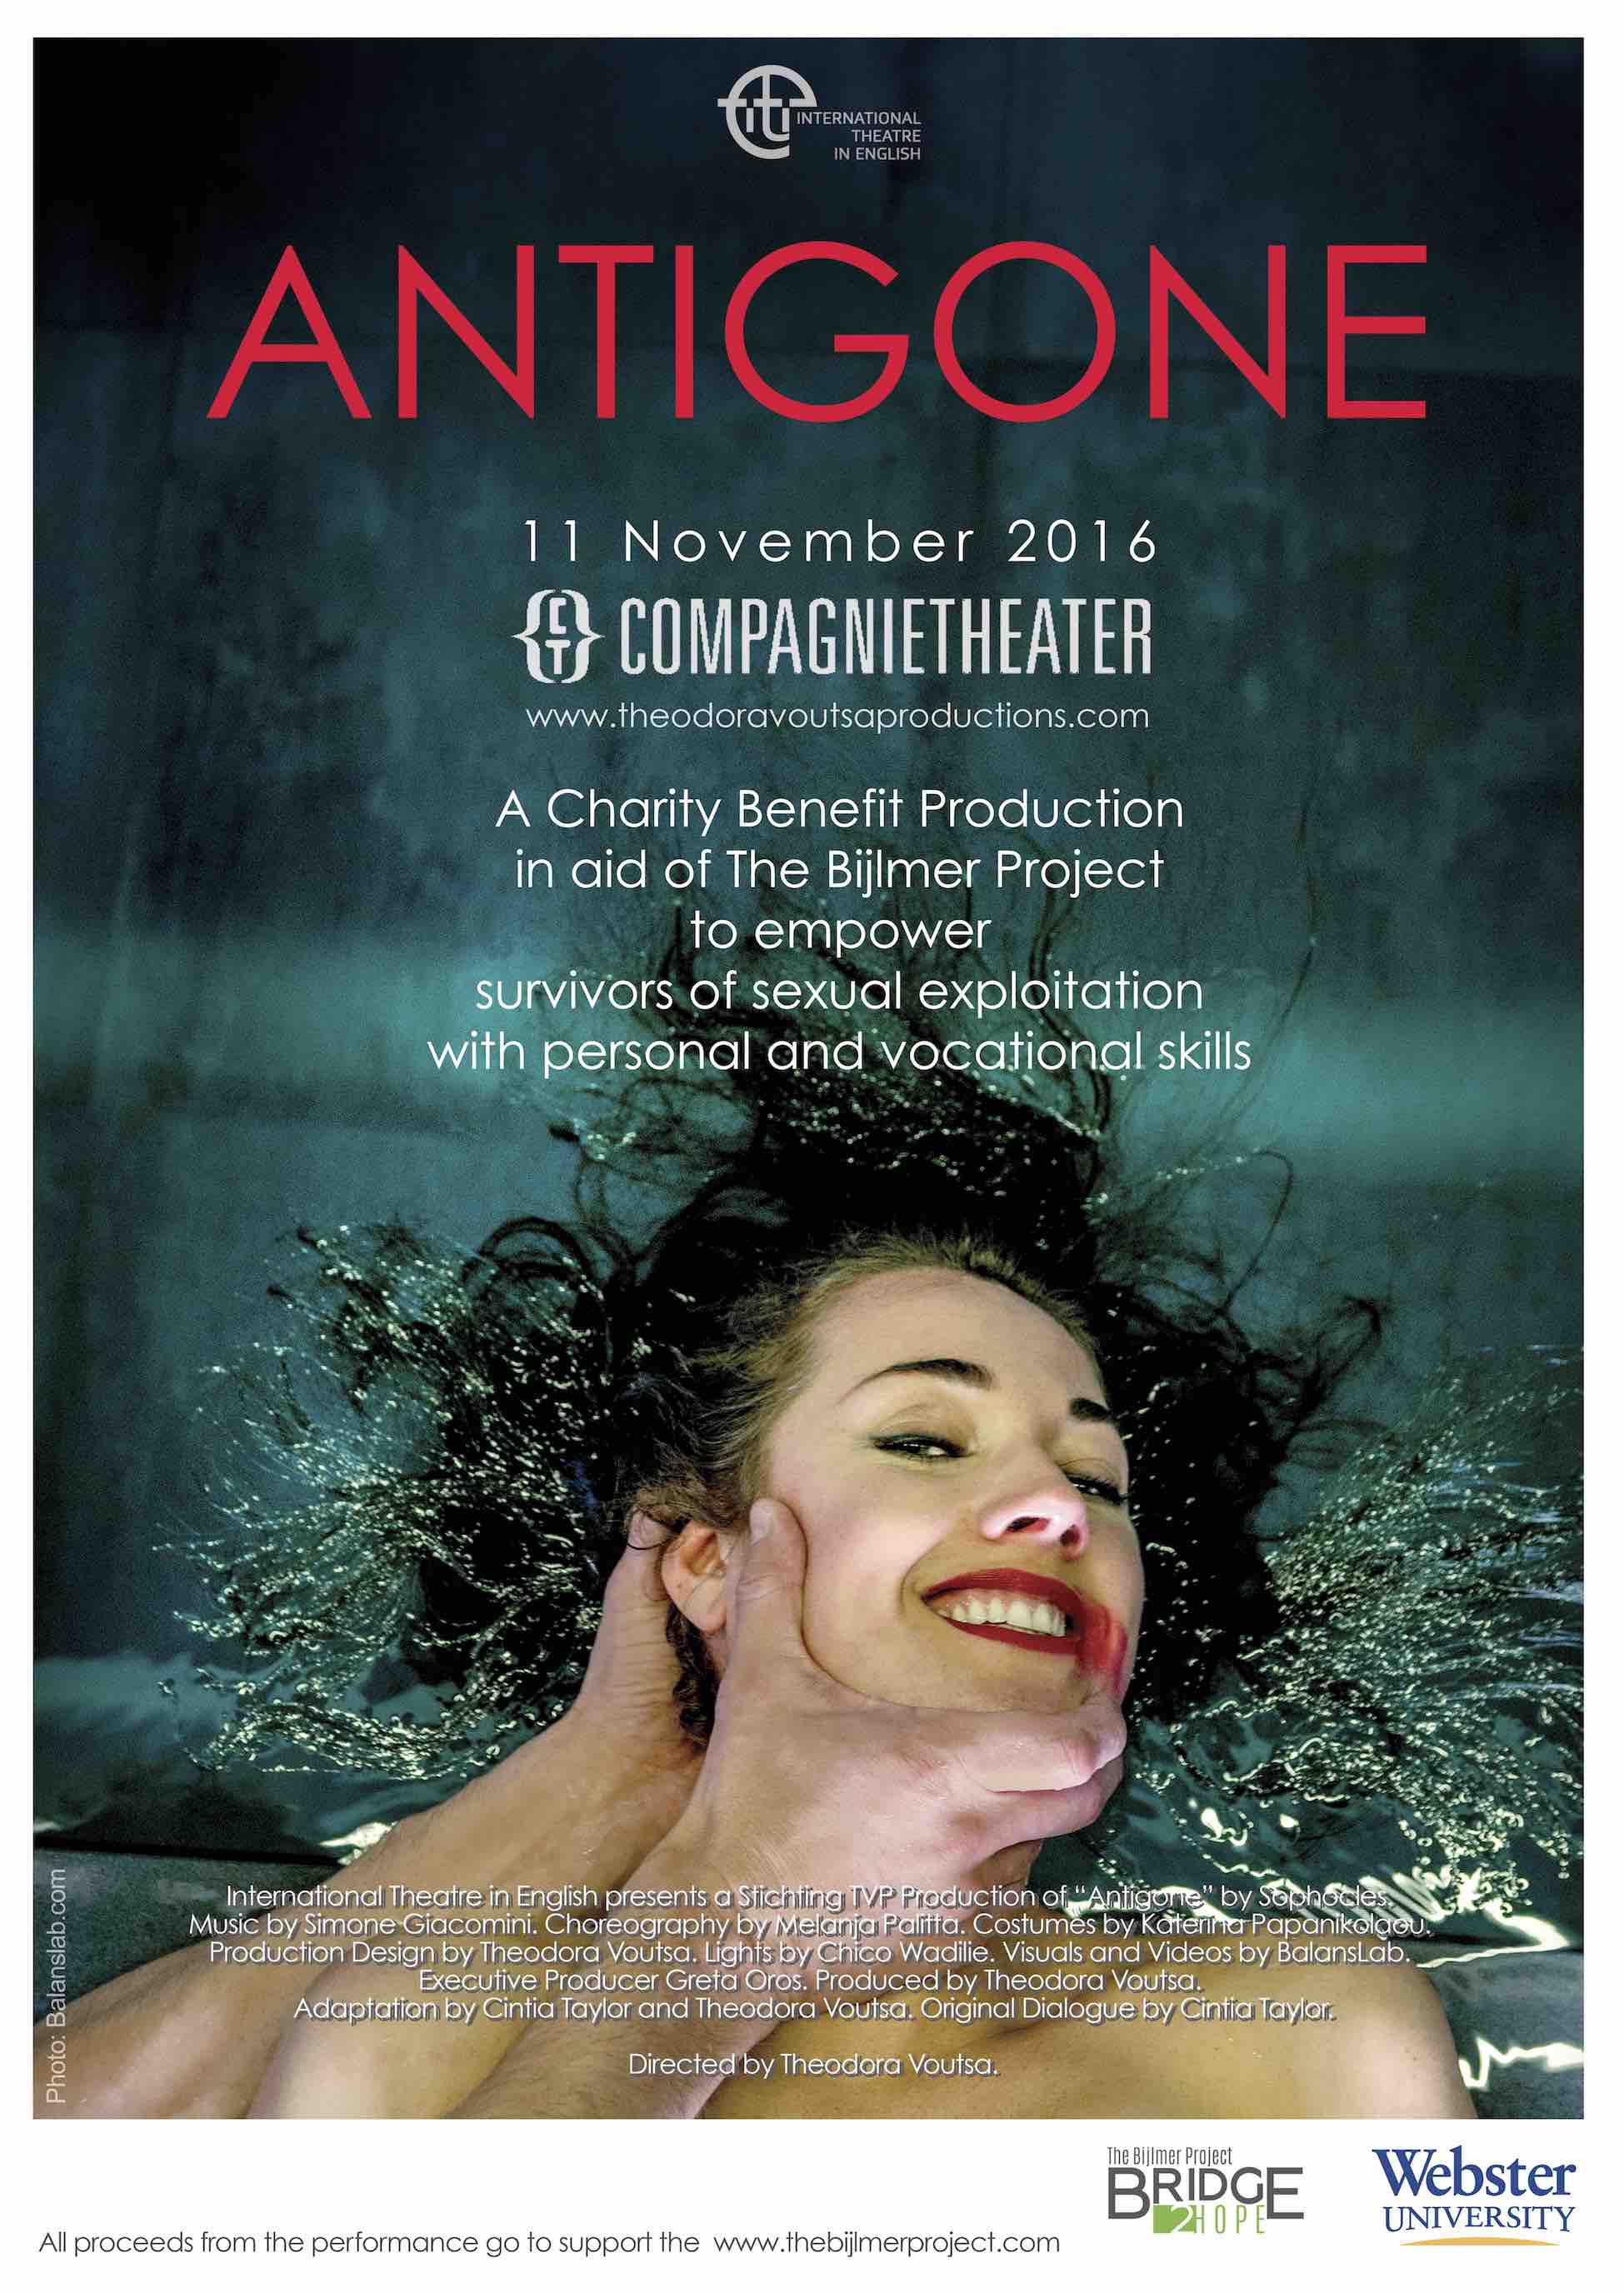 ANTIGONE - a Charity Benefit Production ~ 11 November 2016<br /><p>Many thanks to the International Theatre in English for their generosity in donating all proceeds for this production of ANTIGONE to TheBridge2Hope Foundation (formerly named: The Bijlmer Project) and many thanks to everyone who came to see this impressive play.</p><p>Antigone is a tragedy written by Sophocles in the year 441 BCE.</p><p>The new King Creon is desperate to gain control over a city ravaged by civil war and refuses to bury the body of Antigone&#8217;s rebellious brother. Outraged, she defies him and honours her brother. Creon takes action against her, risking the wrath of the gods.</p>